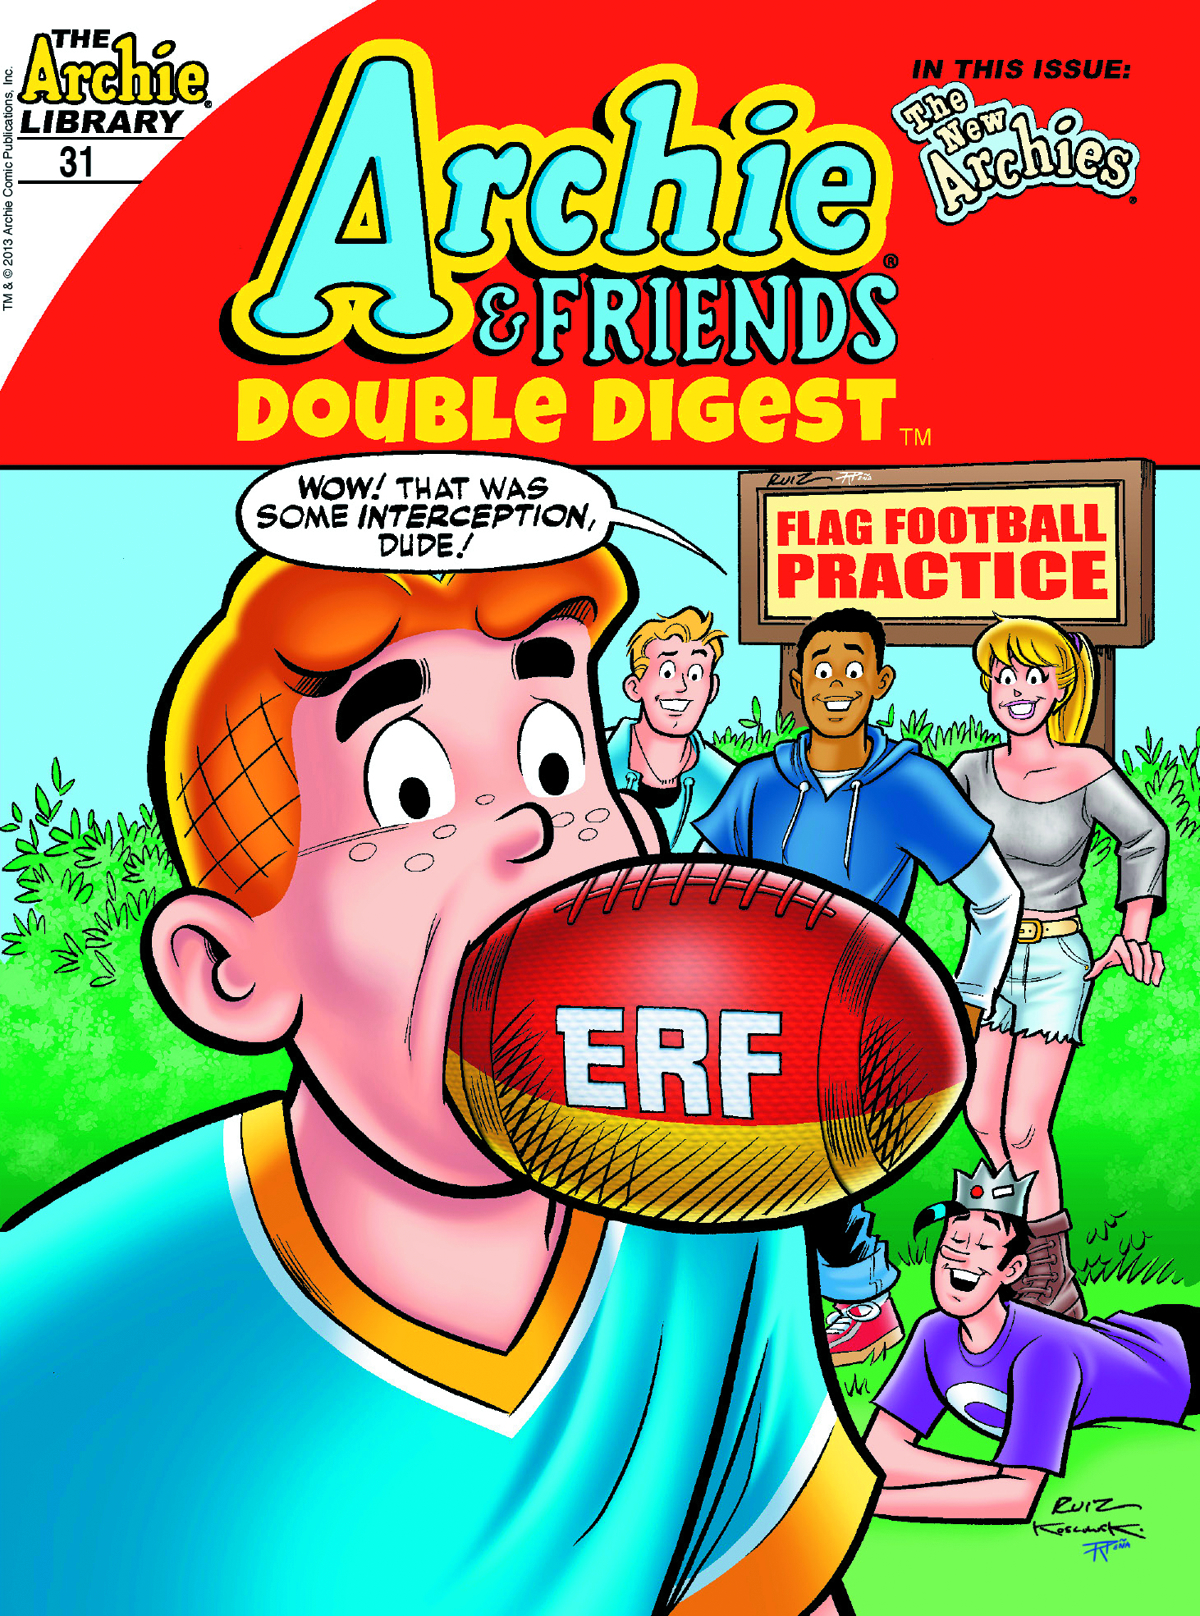 Archie and friends. Френдс Дабл. Дабл френд. Archie & friends Comics Jughead Archi Veronica Mr. Weatherbe. Friends issues